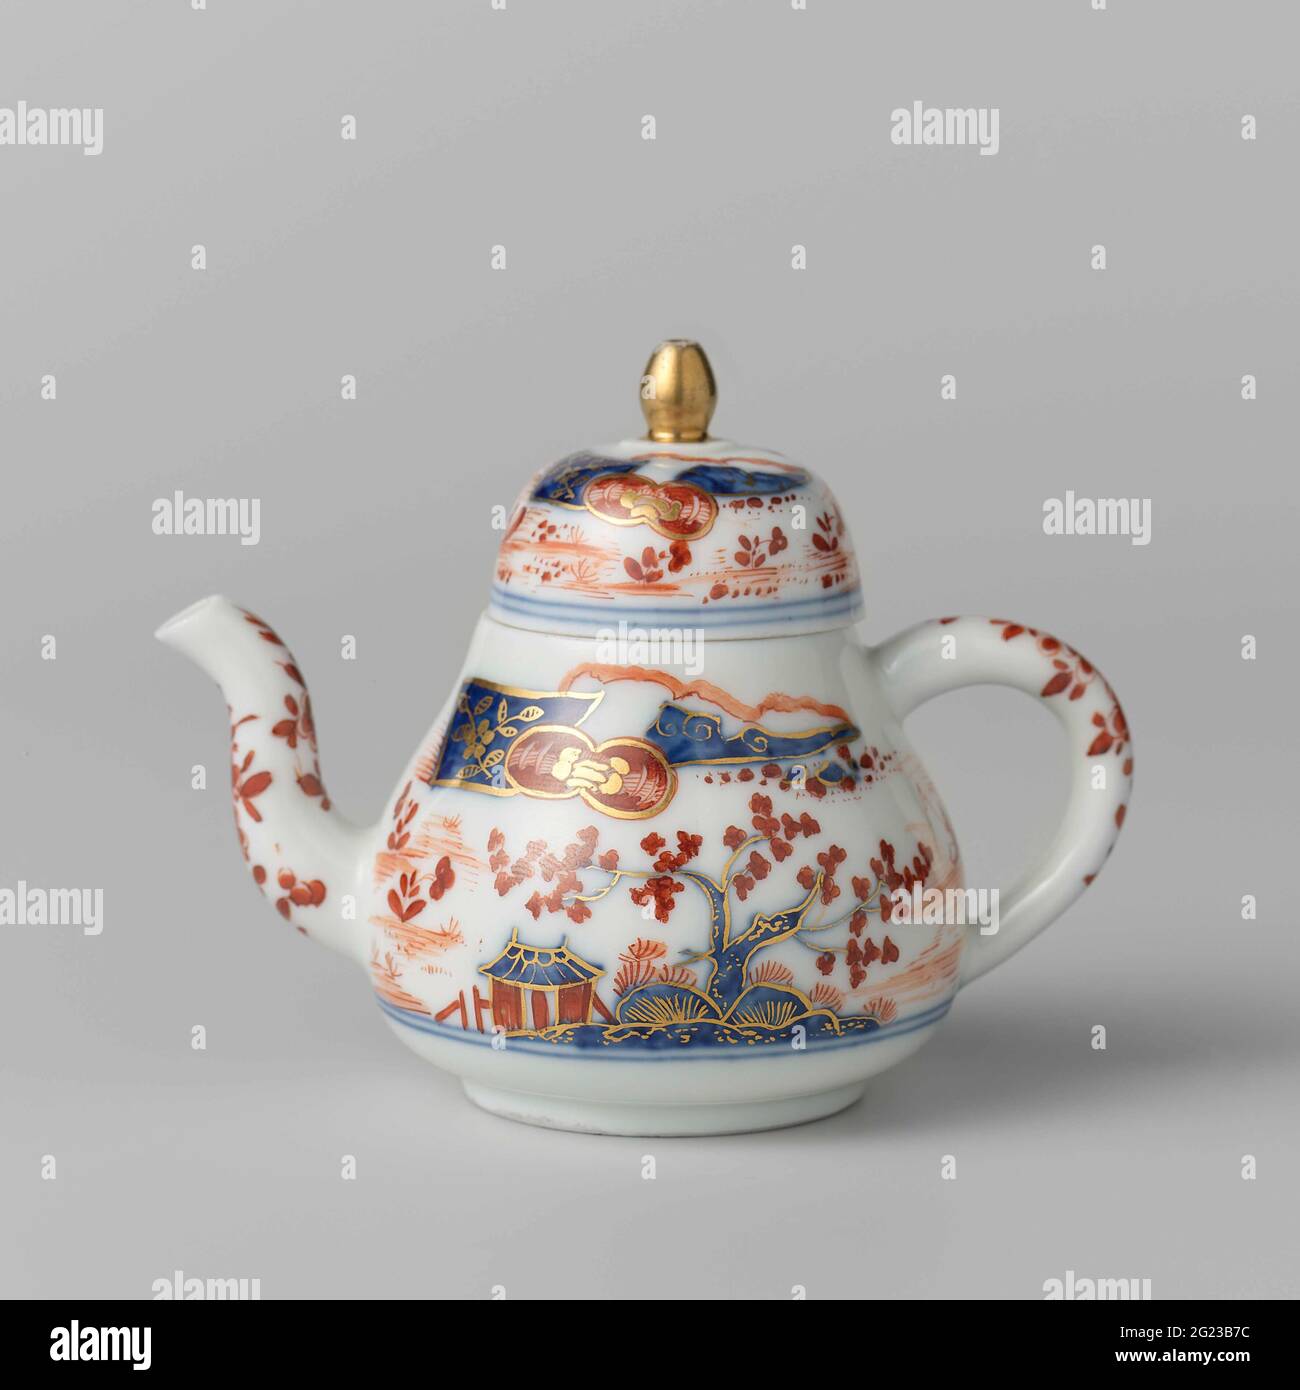 Teapot, painted with an Imari decor. Teapot of painted porcelain. The teapot is painted in the Imii style with trees, houses and a fisherman in a boat. The teapot has been marked. Stock Photo